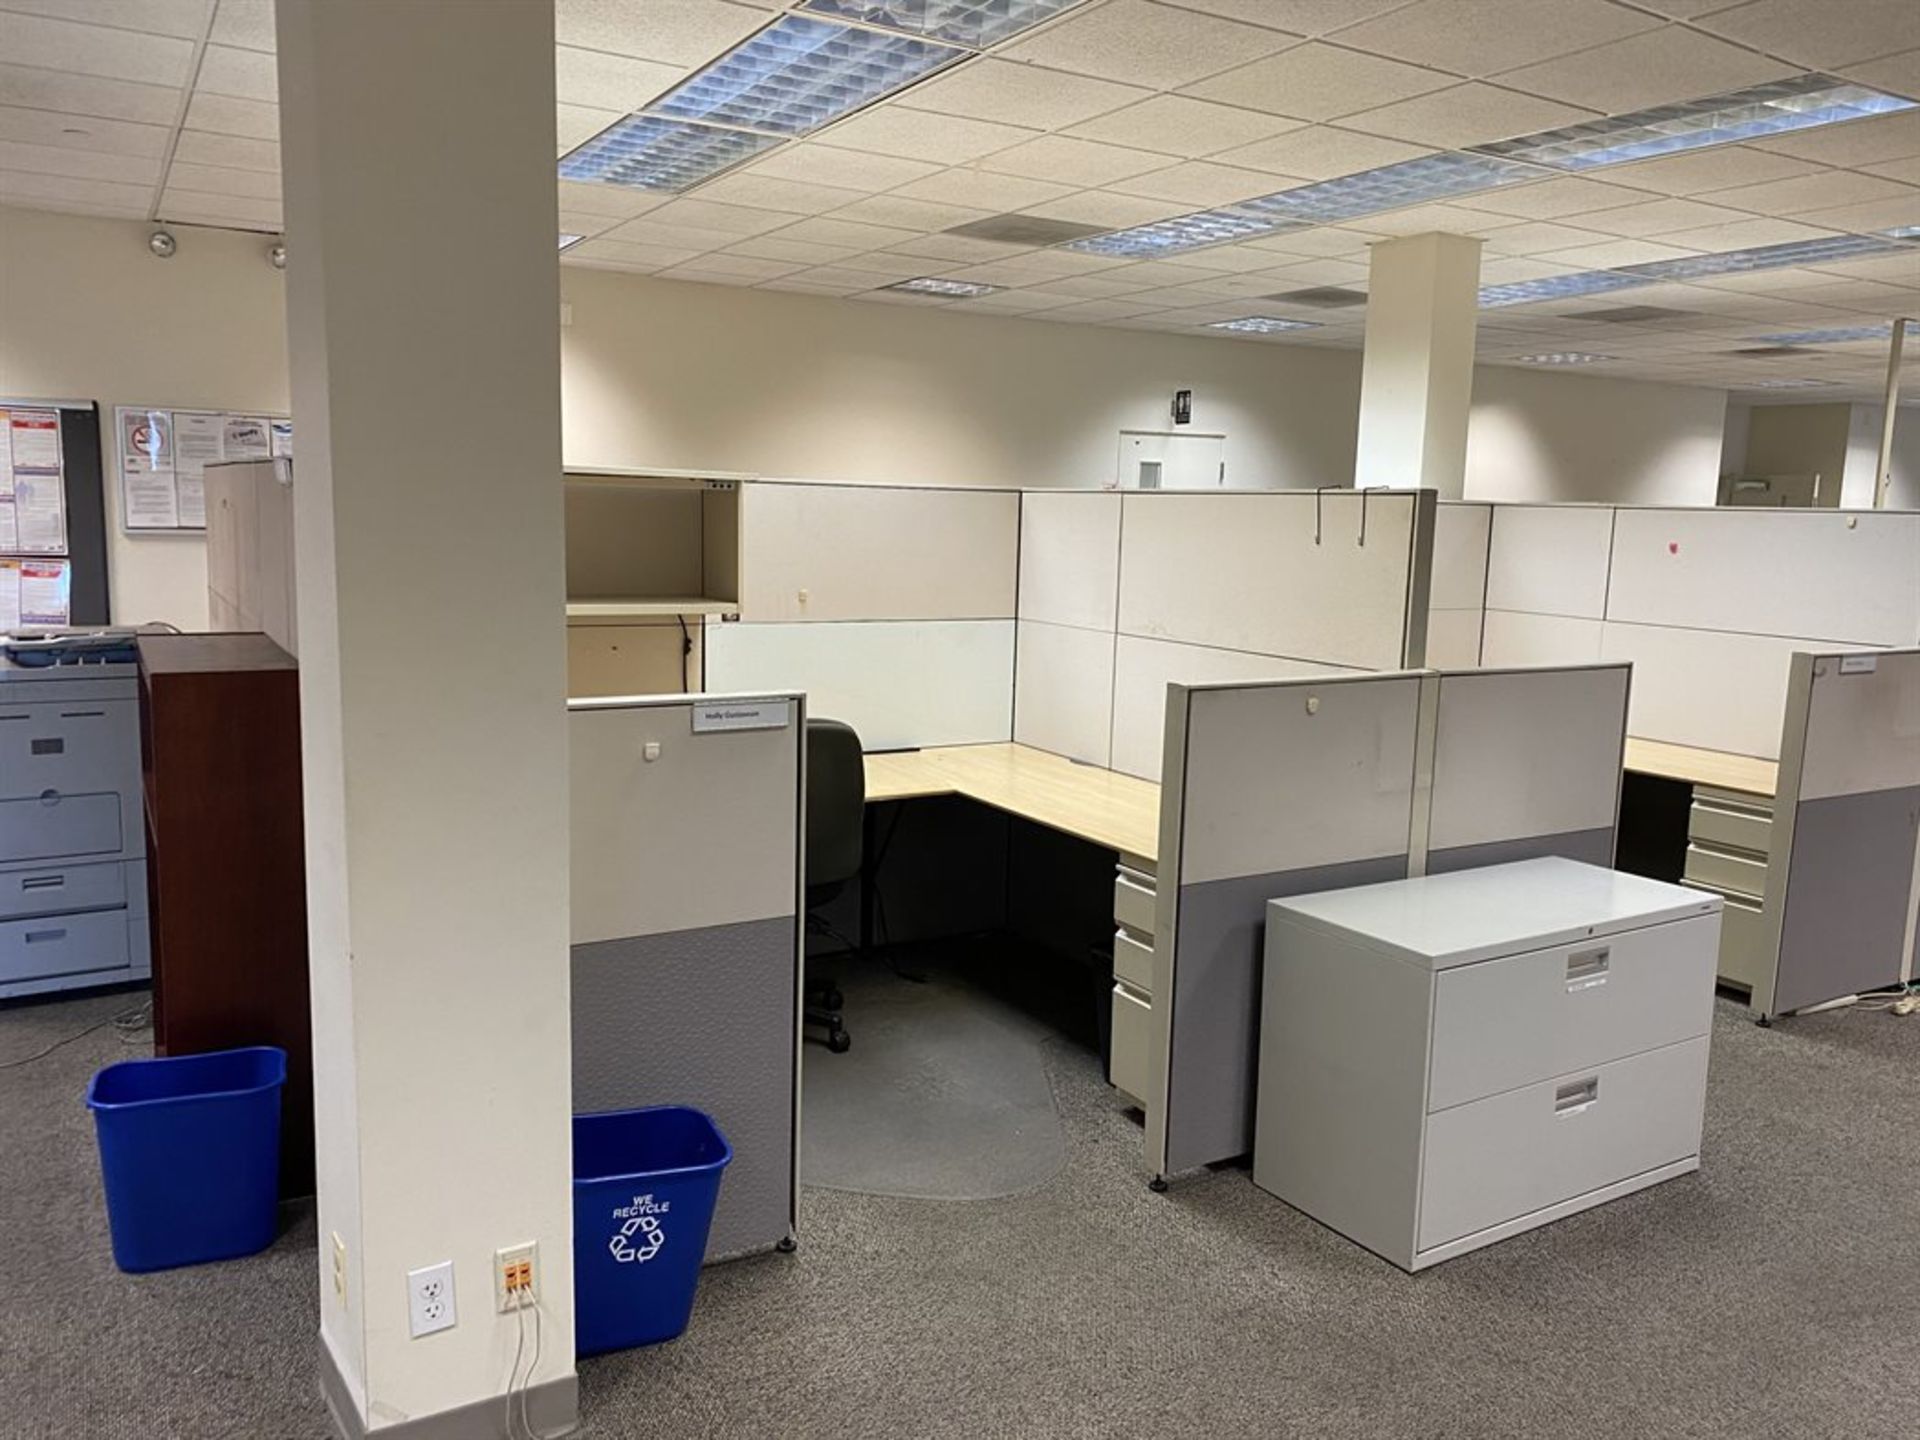 Approximately 40 Office Cubicles - Image 4 of 7